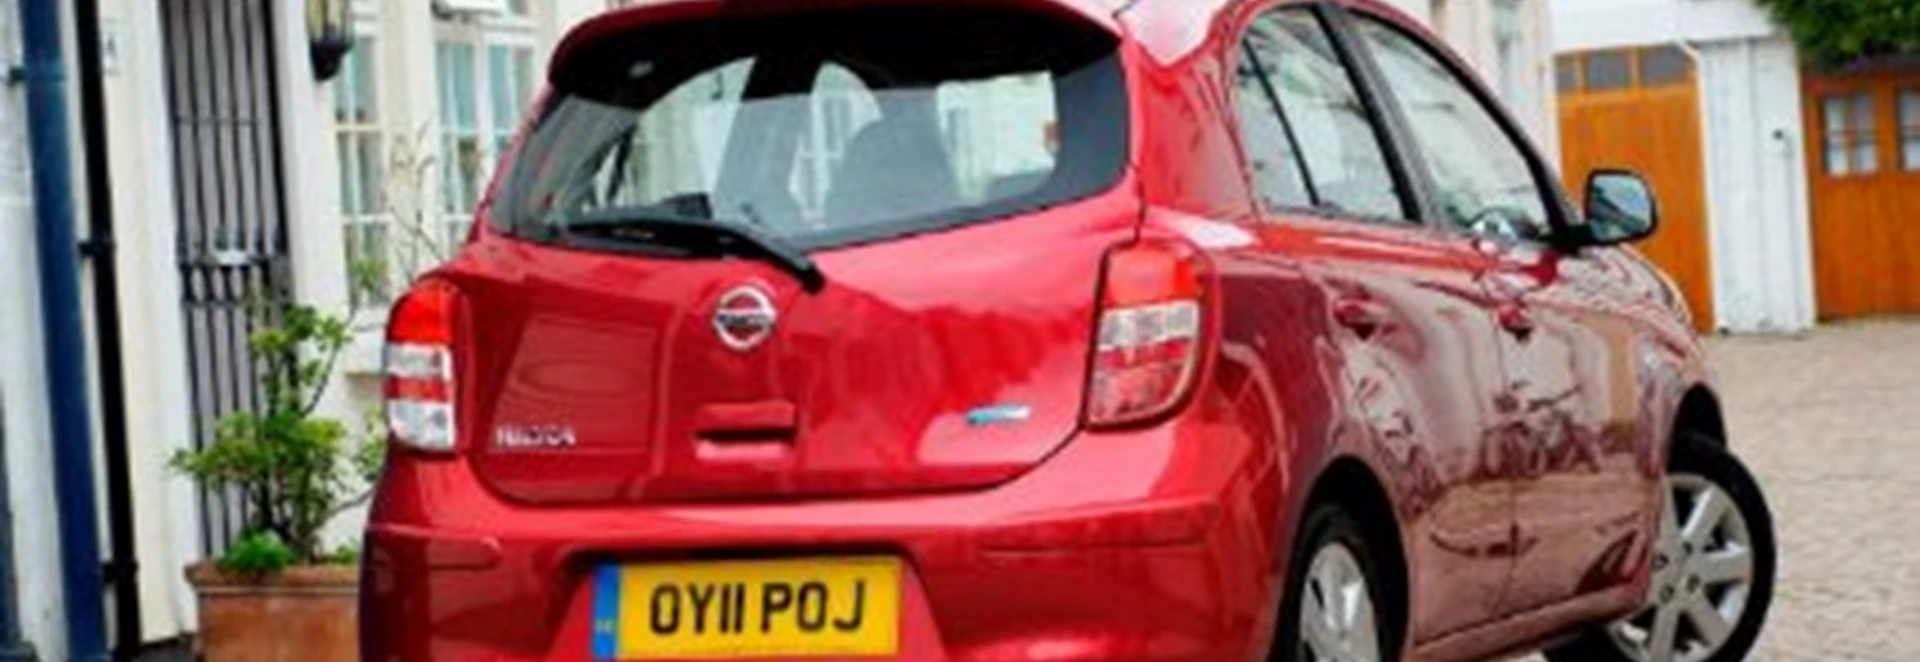 New Nissan Micra 1.2-litre DIG-S first drive 